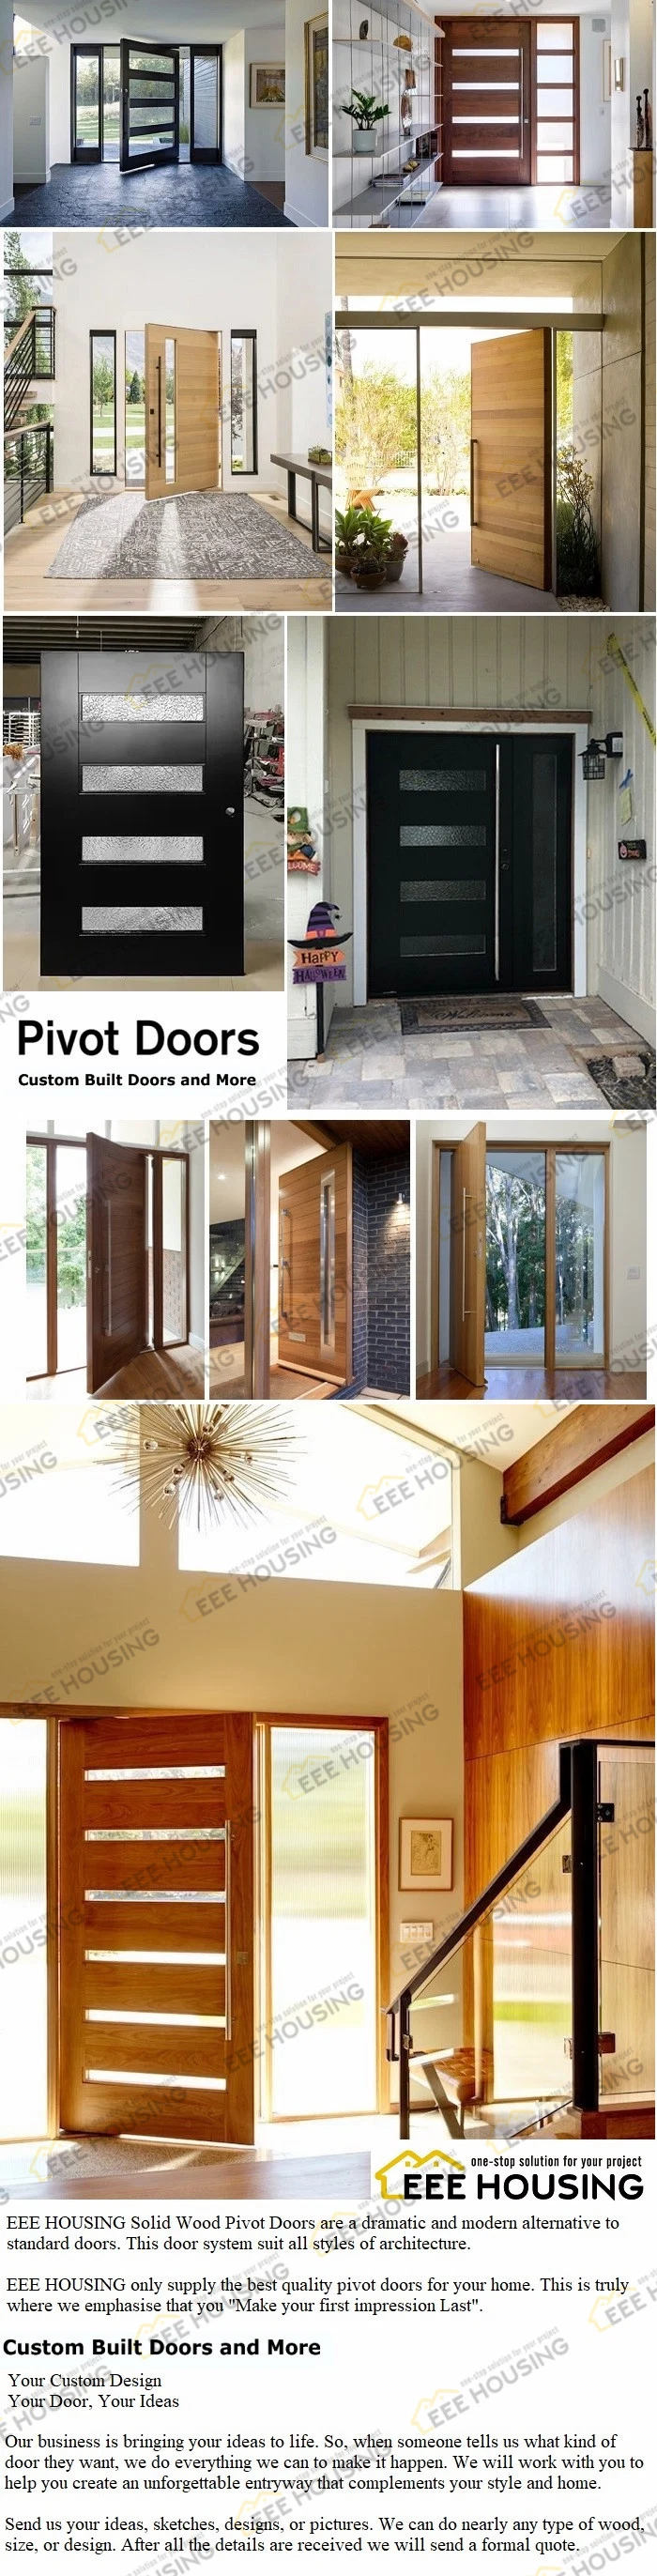 China Factory Direct Supply Us Modern Design Exterior Pivot Solid Wood Door with Sidelights